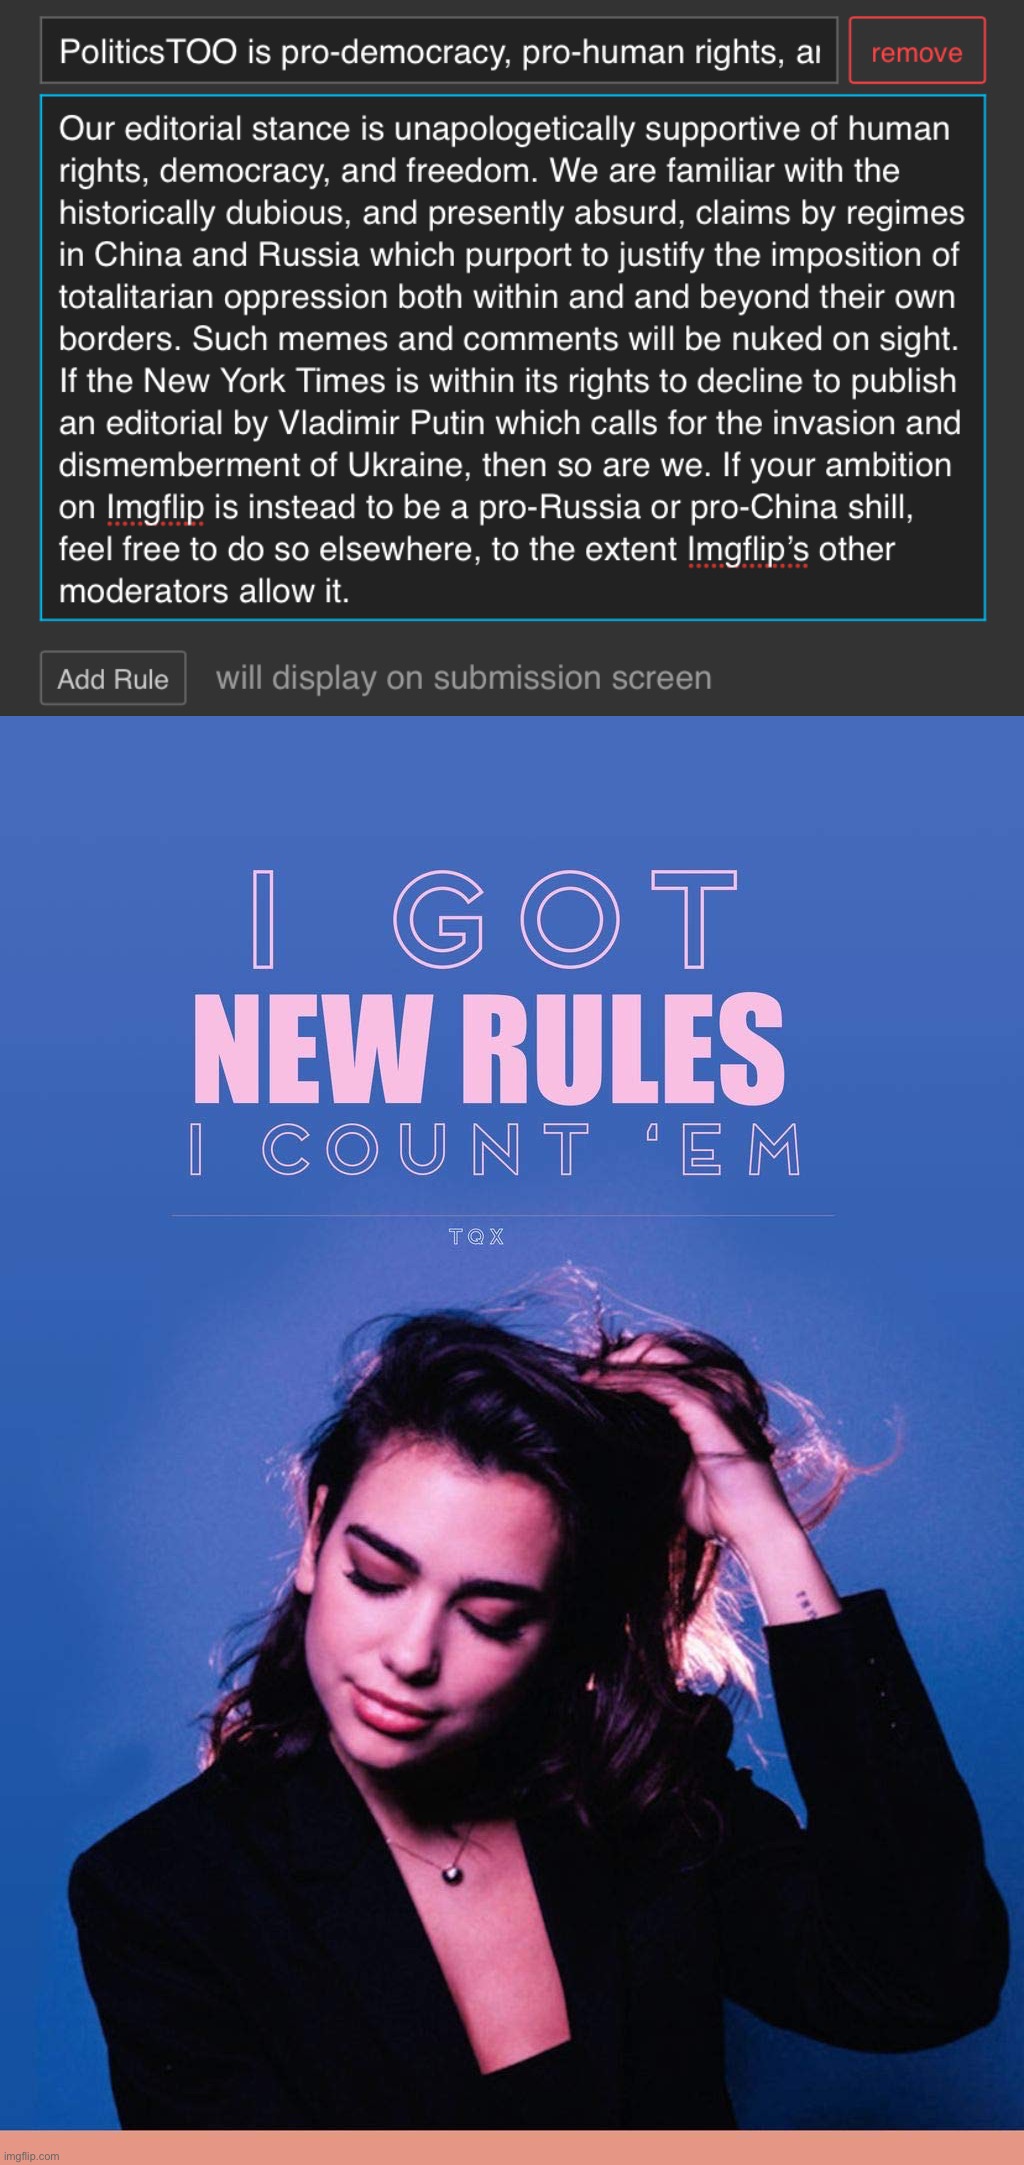 Europe is on the brink of war, and we got new rules. | image tagged in politicstoo pro-democracy,dua lipa i got new rules,vladimir putin,totalitarianism,human rights,propaganda | made w/ Imgflip meme maker